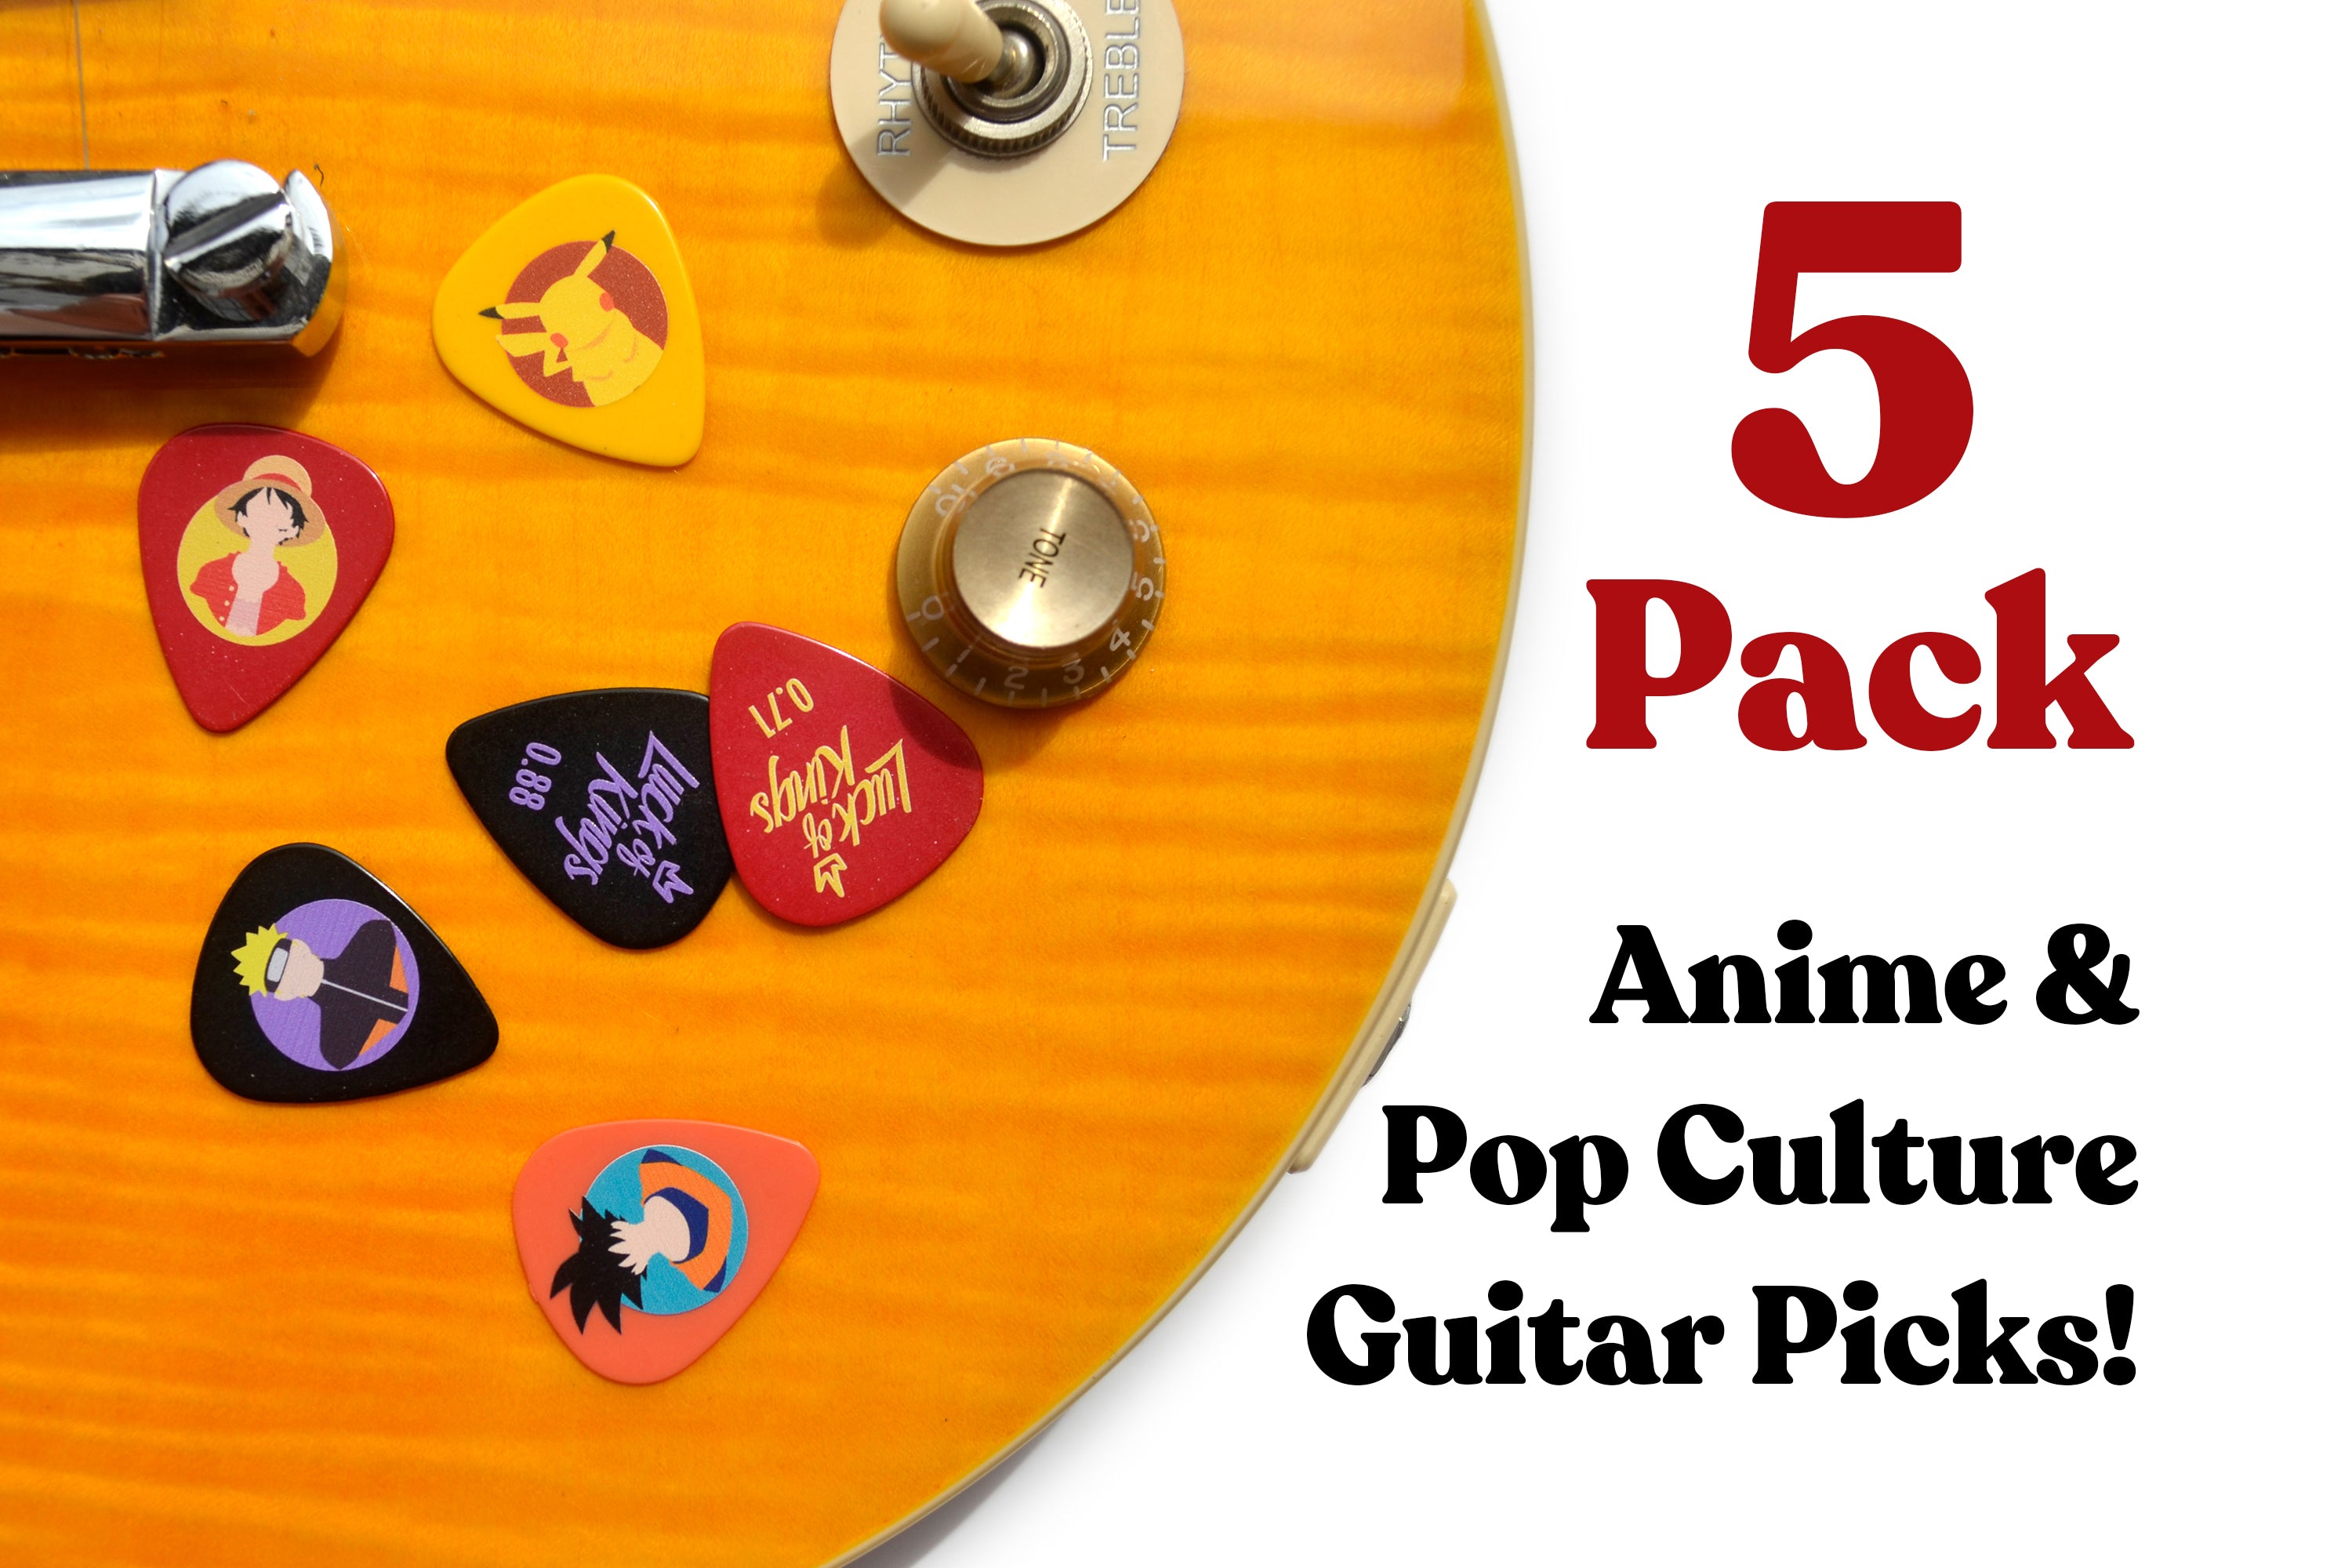 5 Pack of Anime and Pop Culture Guitar Picks